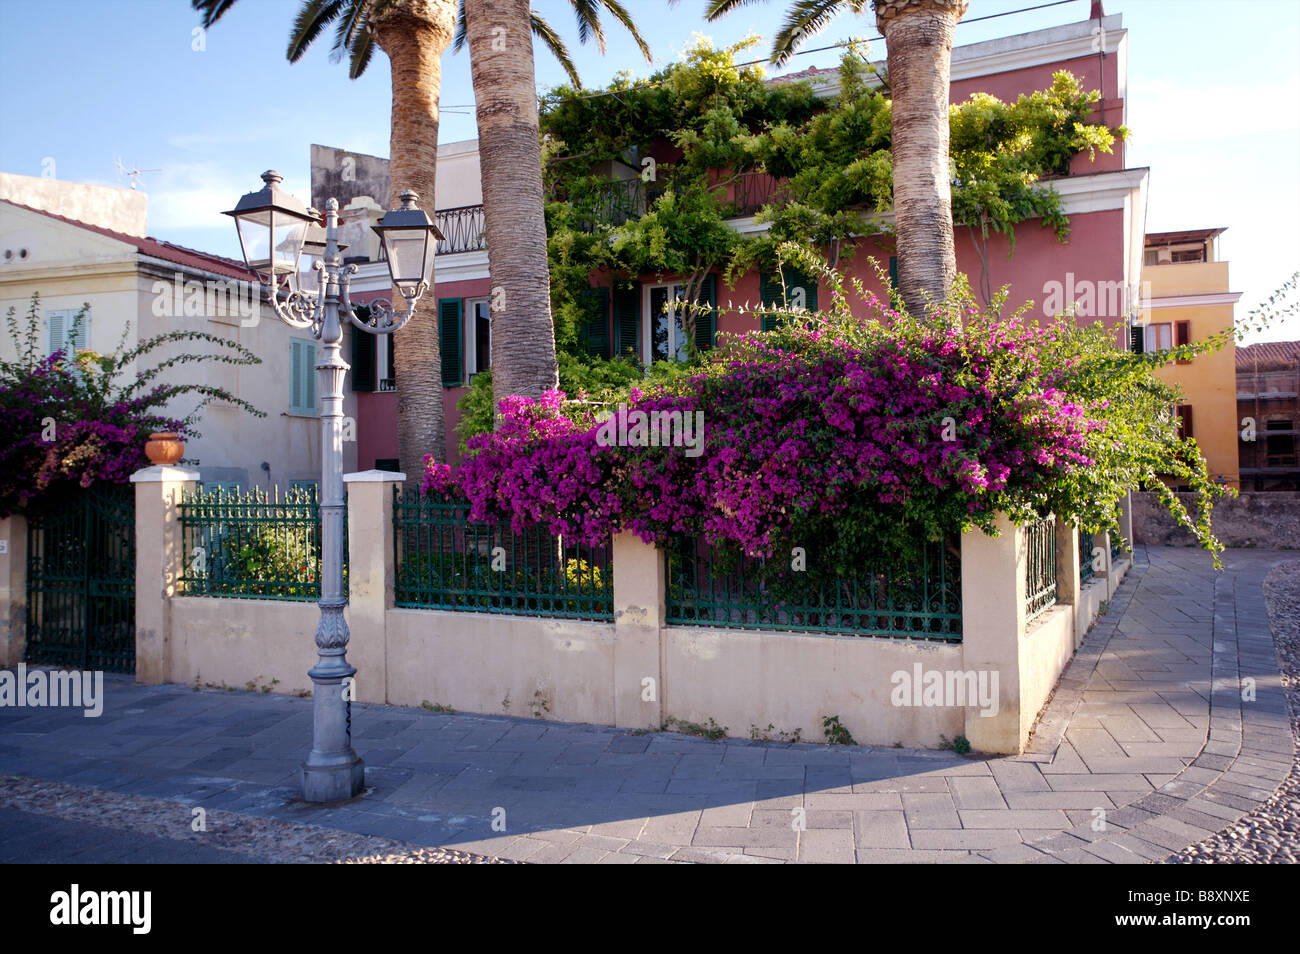 A villa on the coast of Sardinia near the port of Alghero with a large creeper on the outside wall. Stock Photo